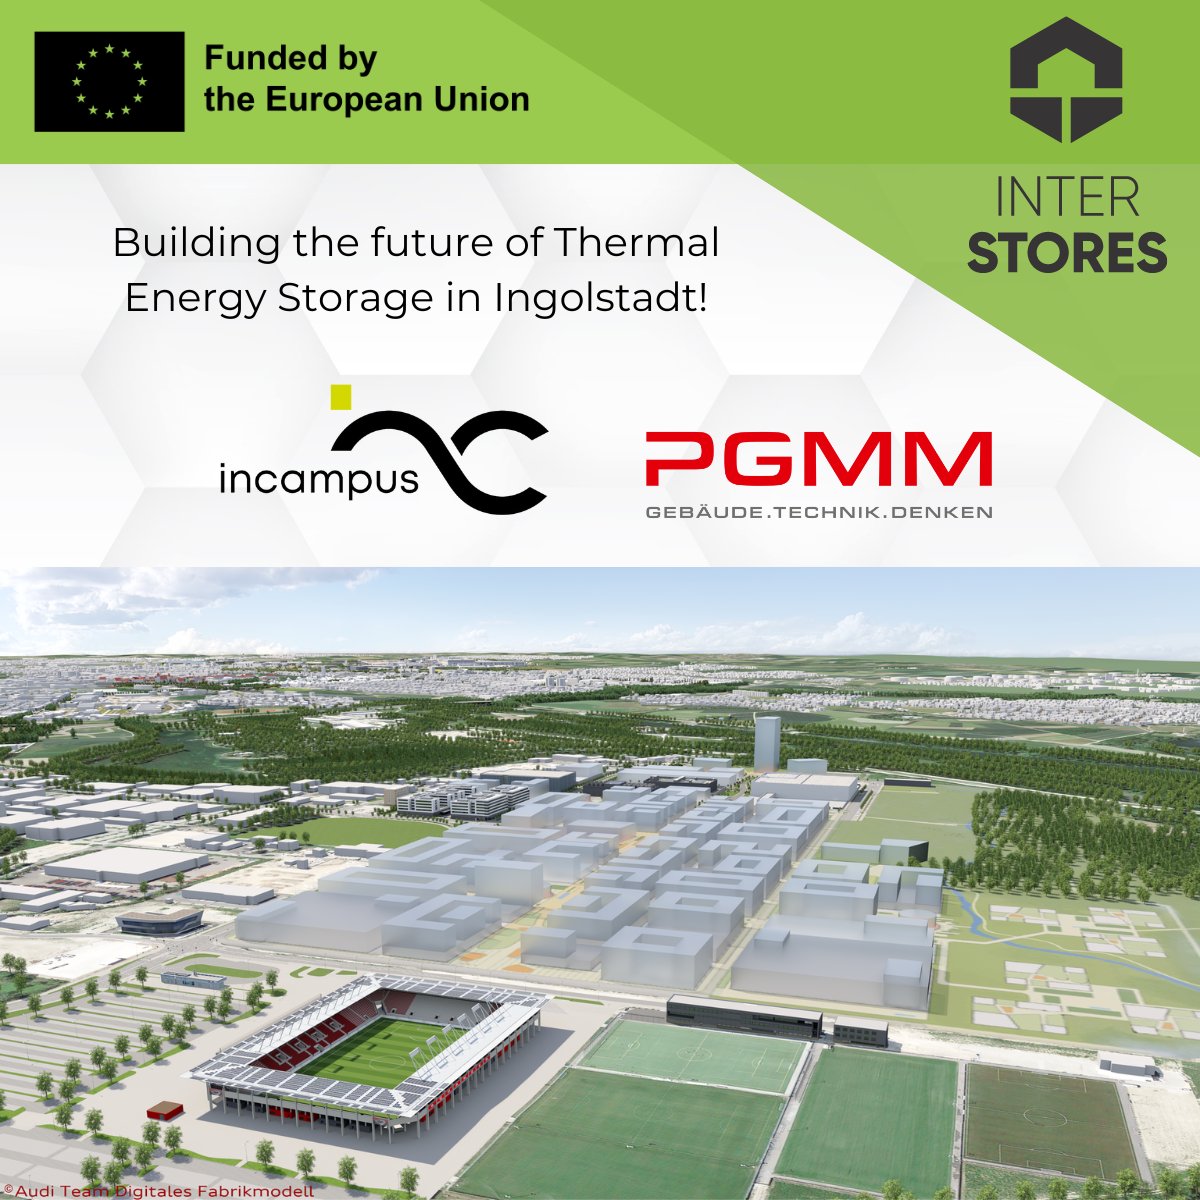 🌍@INTERSTORES: At incampus in Ingolstadt @Audi & @PGMM are innovation sustainable energy, turning buildings into energy savers & generators. From waste heat to smart seasonal thermal energy storage! #Sustainability #ThermalEnergyStorage #WasteToEnergy